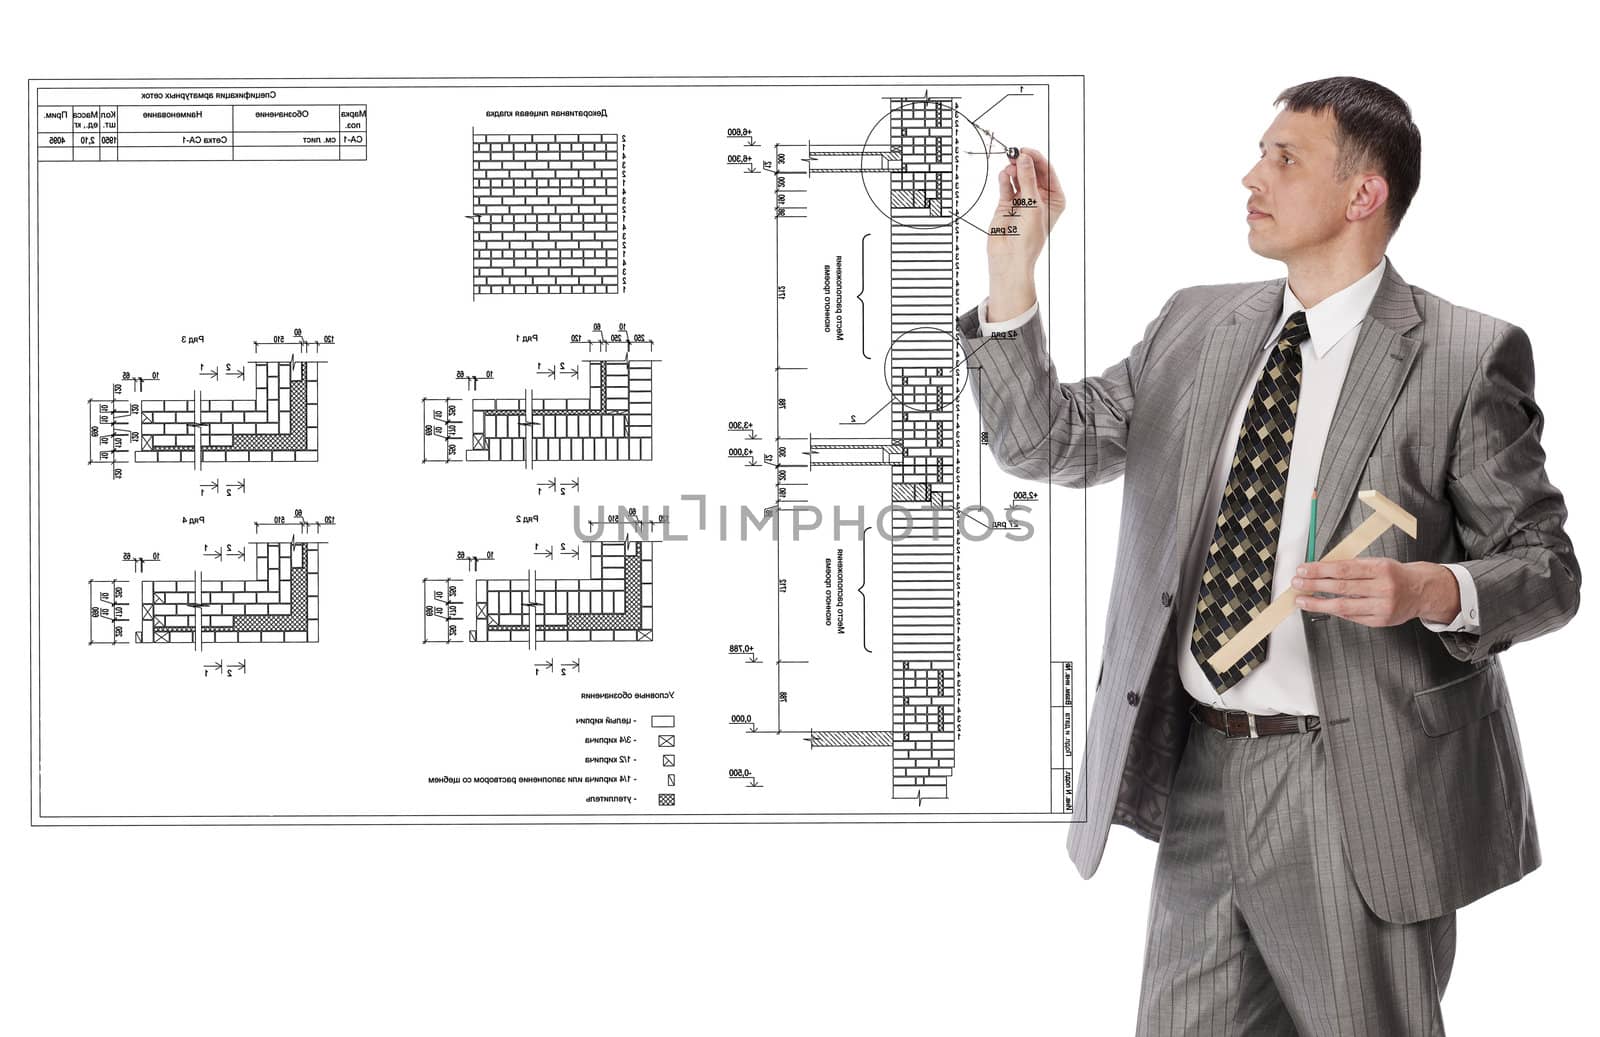 The engineer-designer develops the design documentation for building of residential buildings and industrial complexes